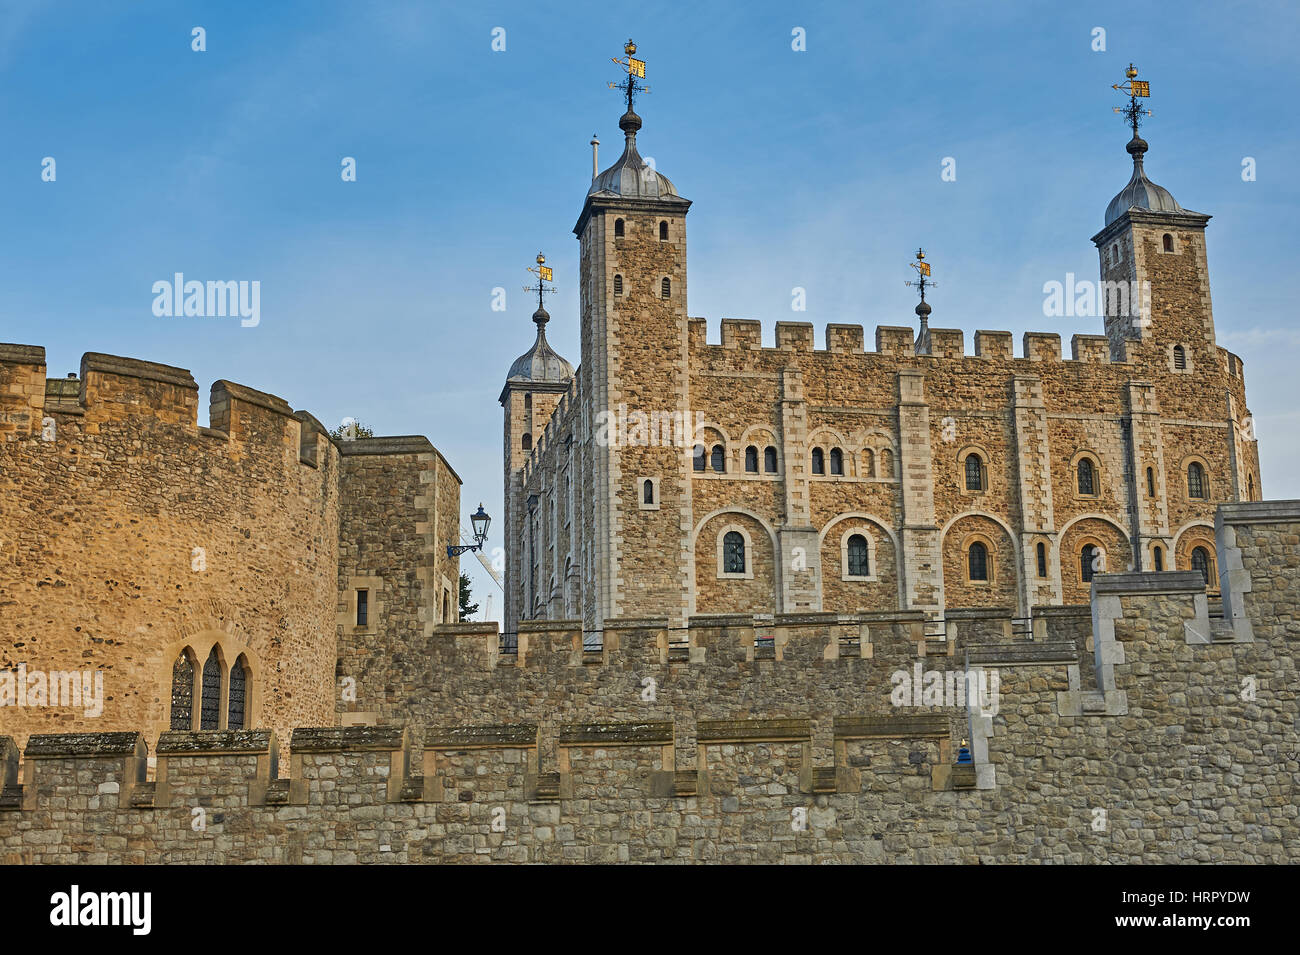 The Tower of London is an iconic landmark popular with tourists. Stock Photo